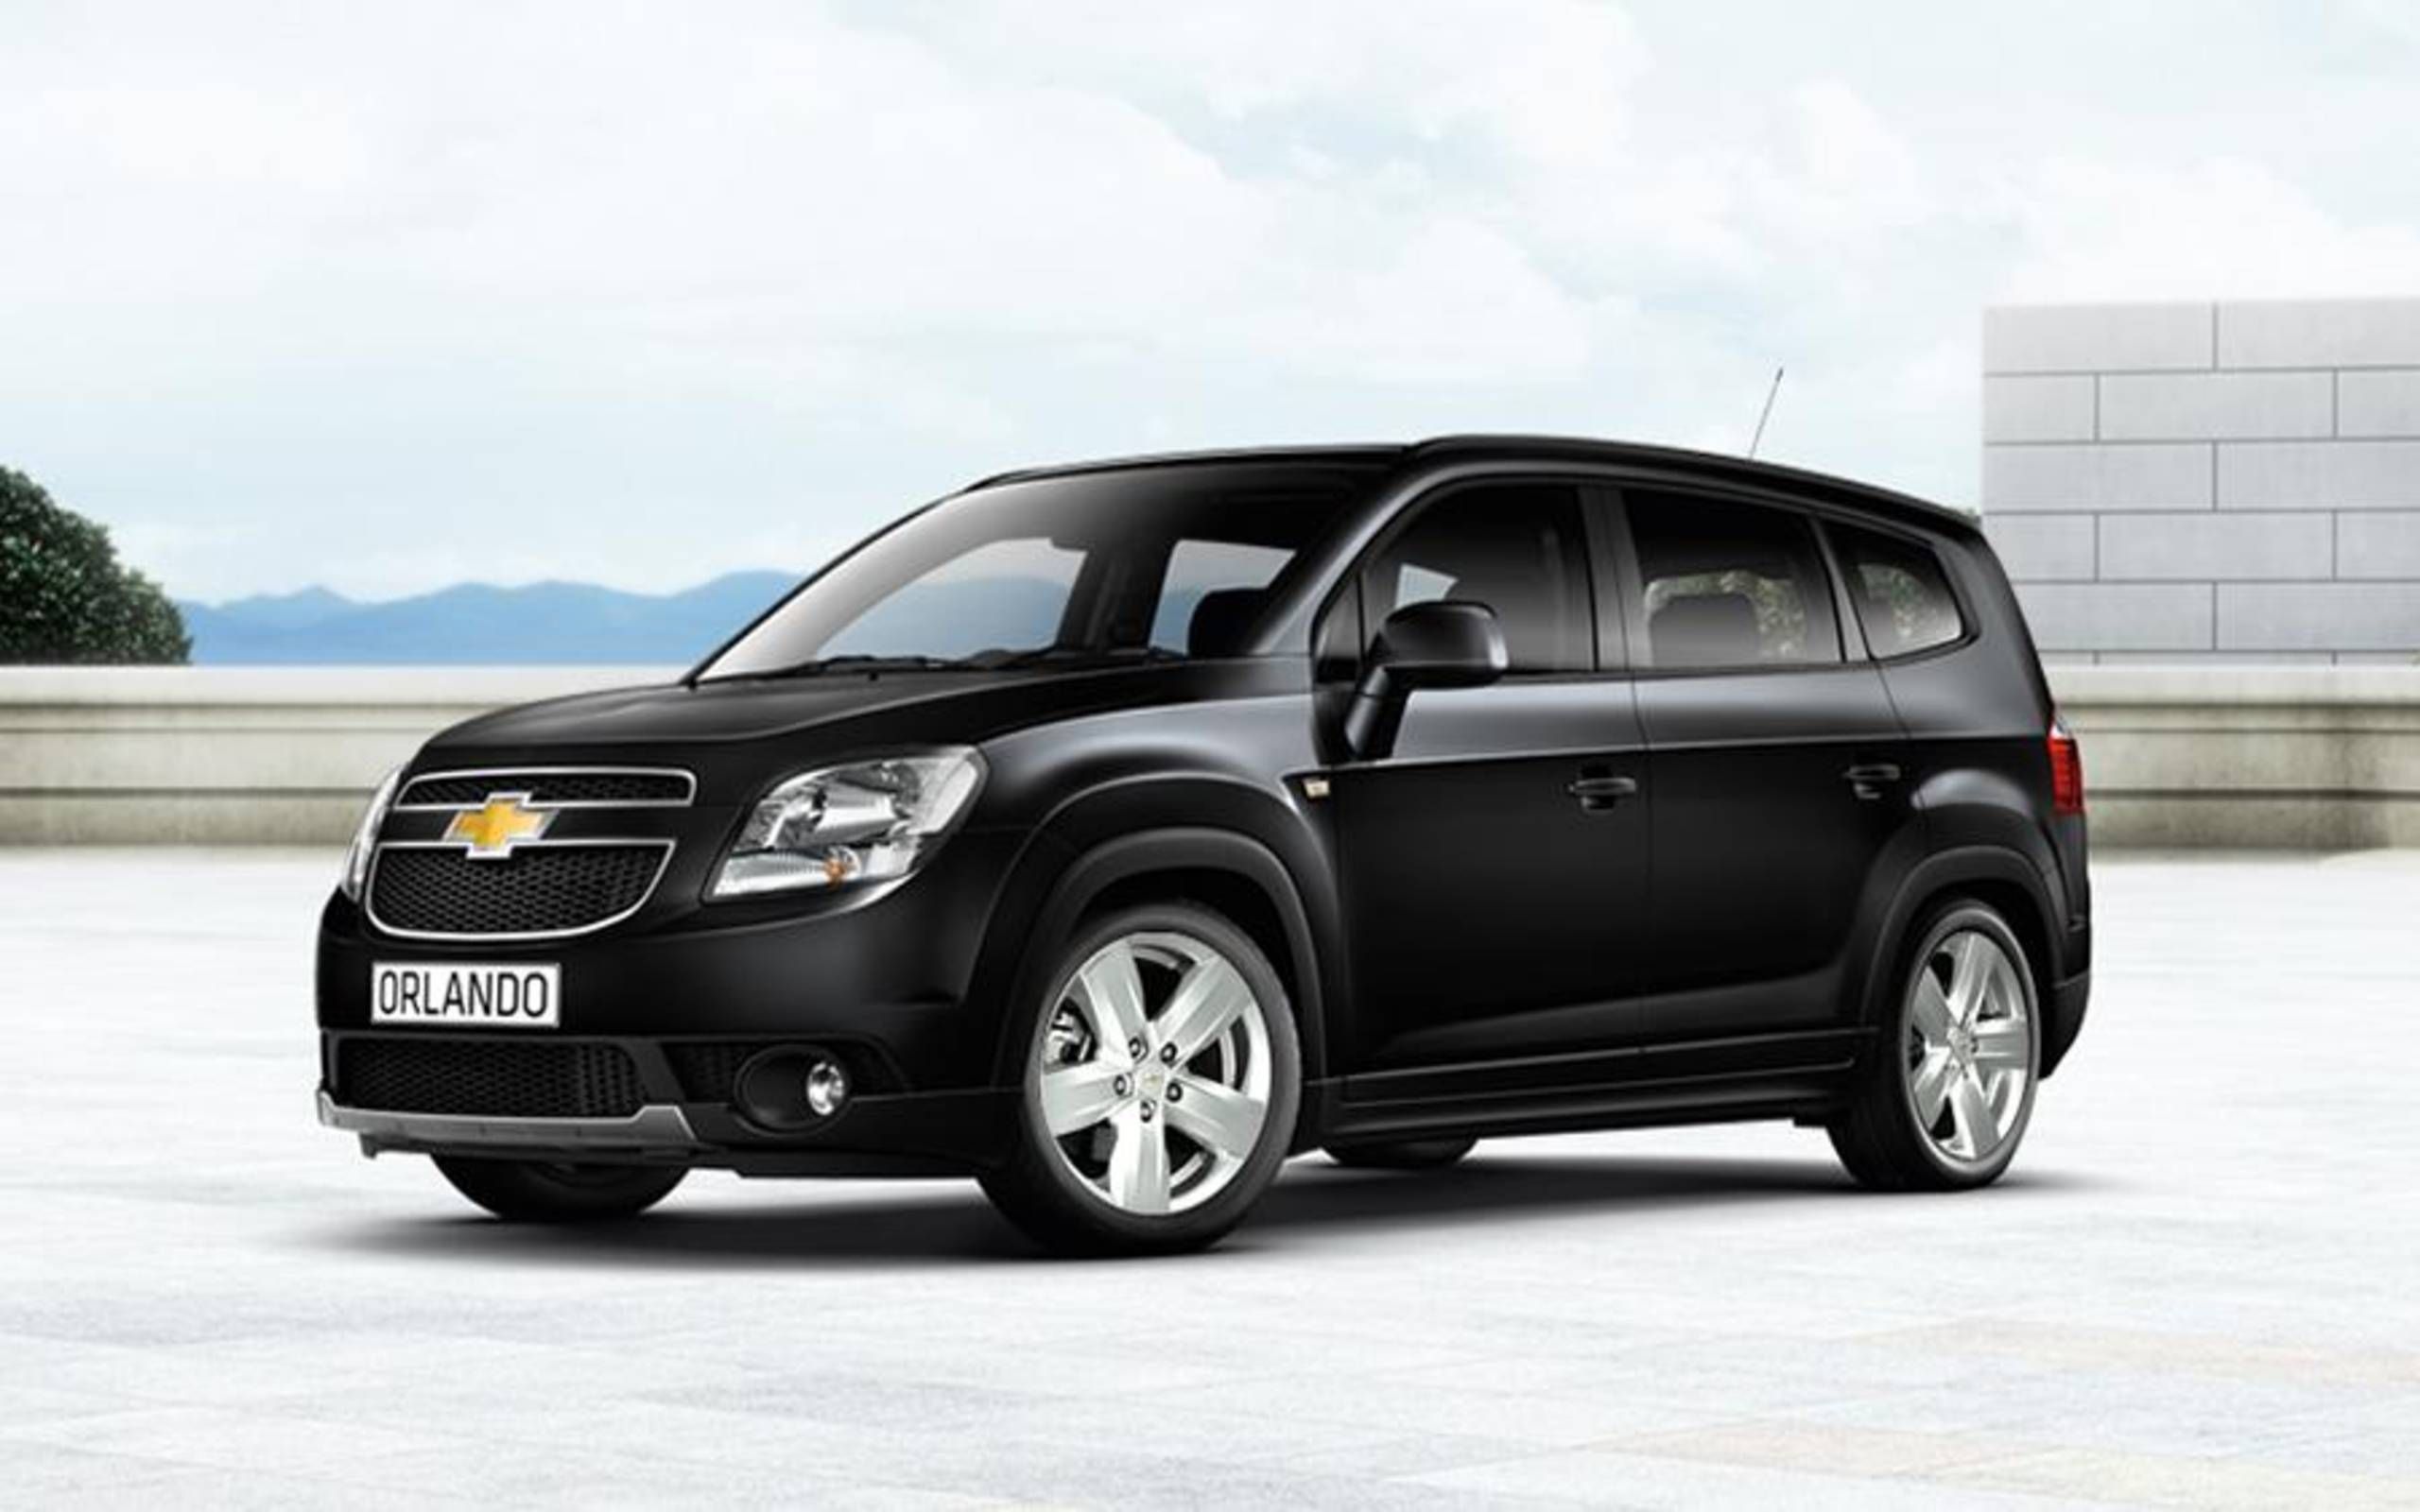 Would you buy a Chevrolet Orlando?